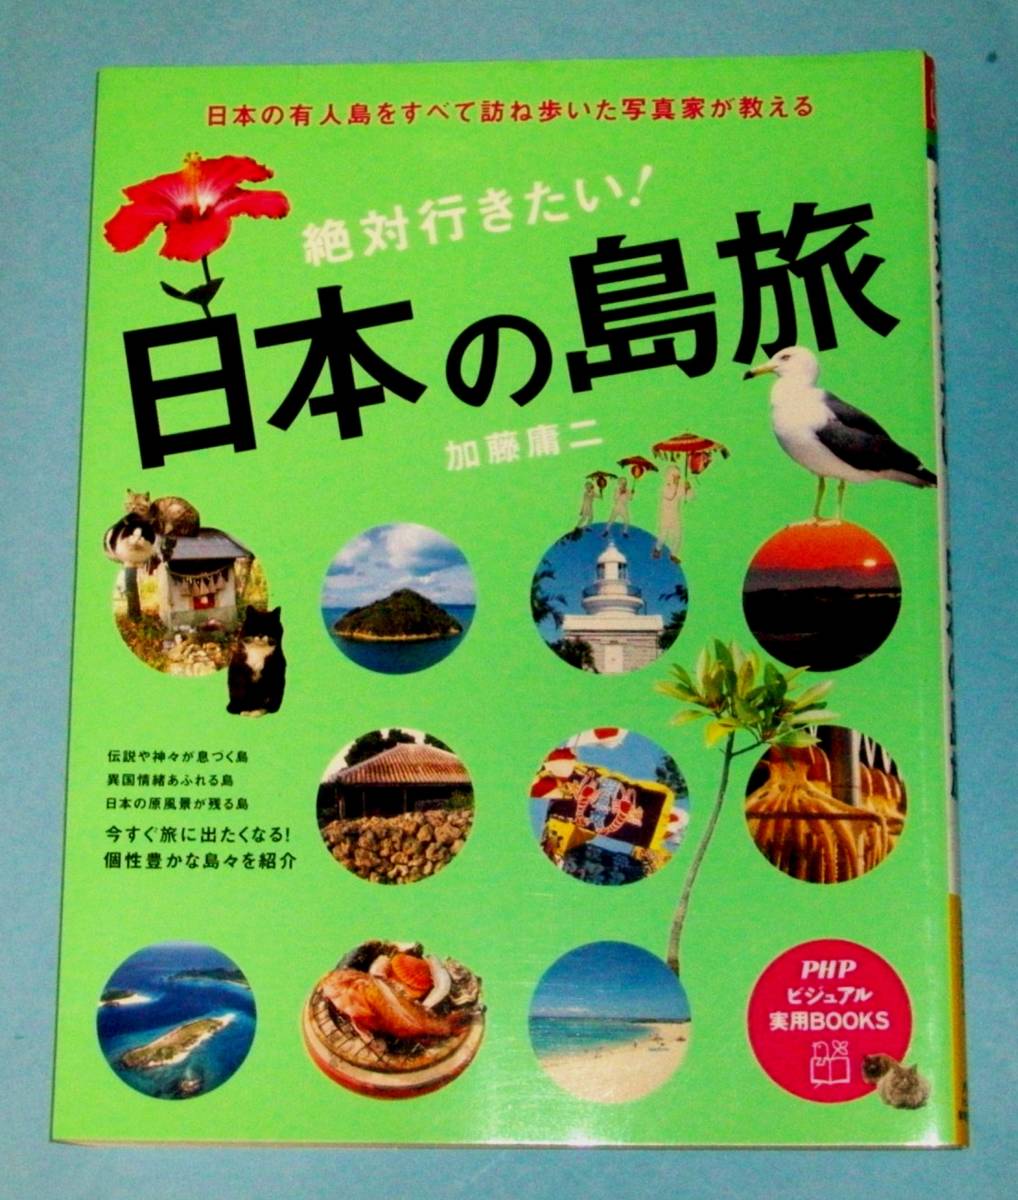  absolute line . want! japanese island . Kato . two PHP visual practical use BOOKS used inspection . writing island salt . main island cover . island dog island another 